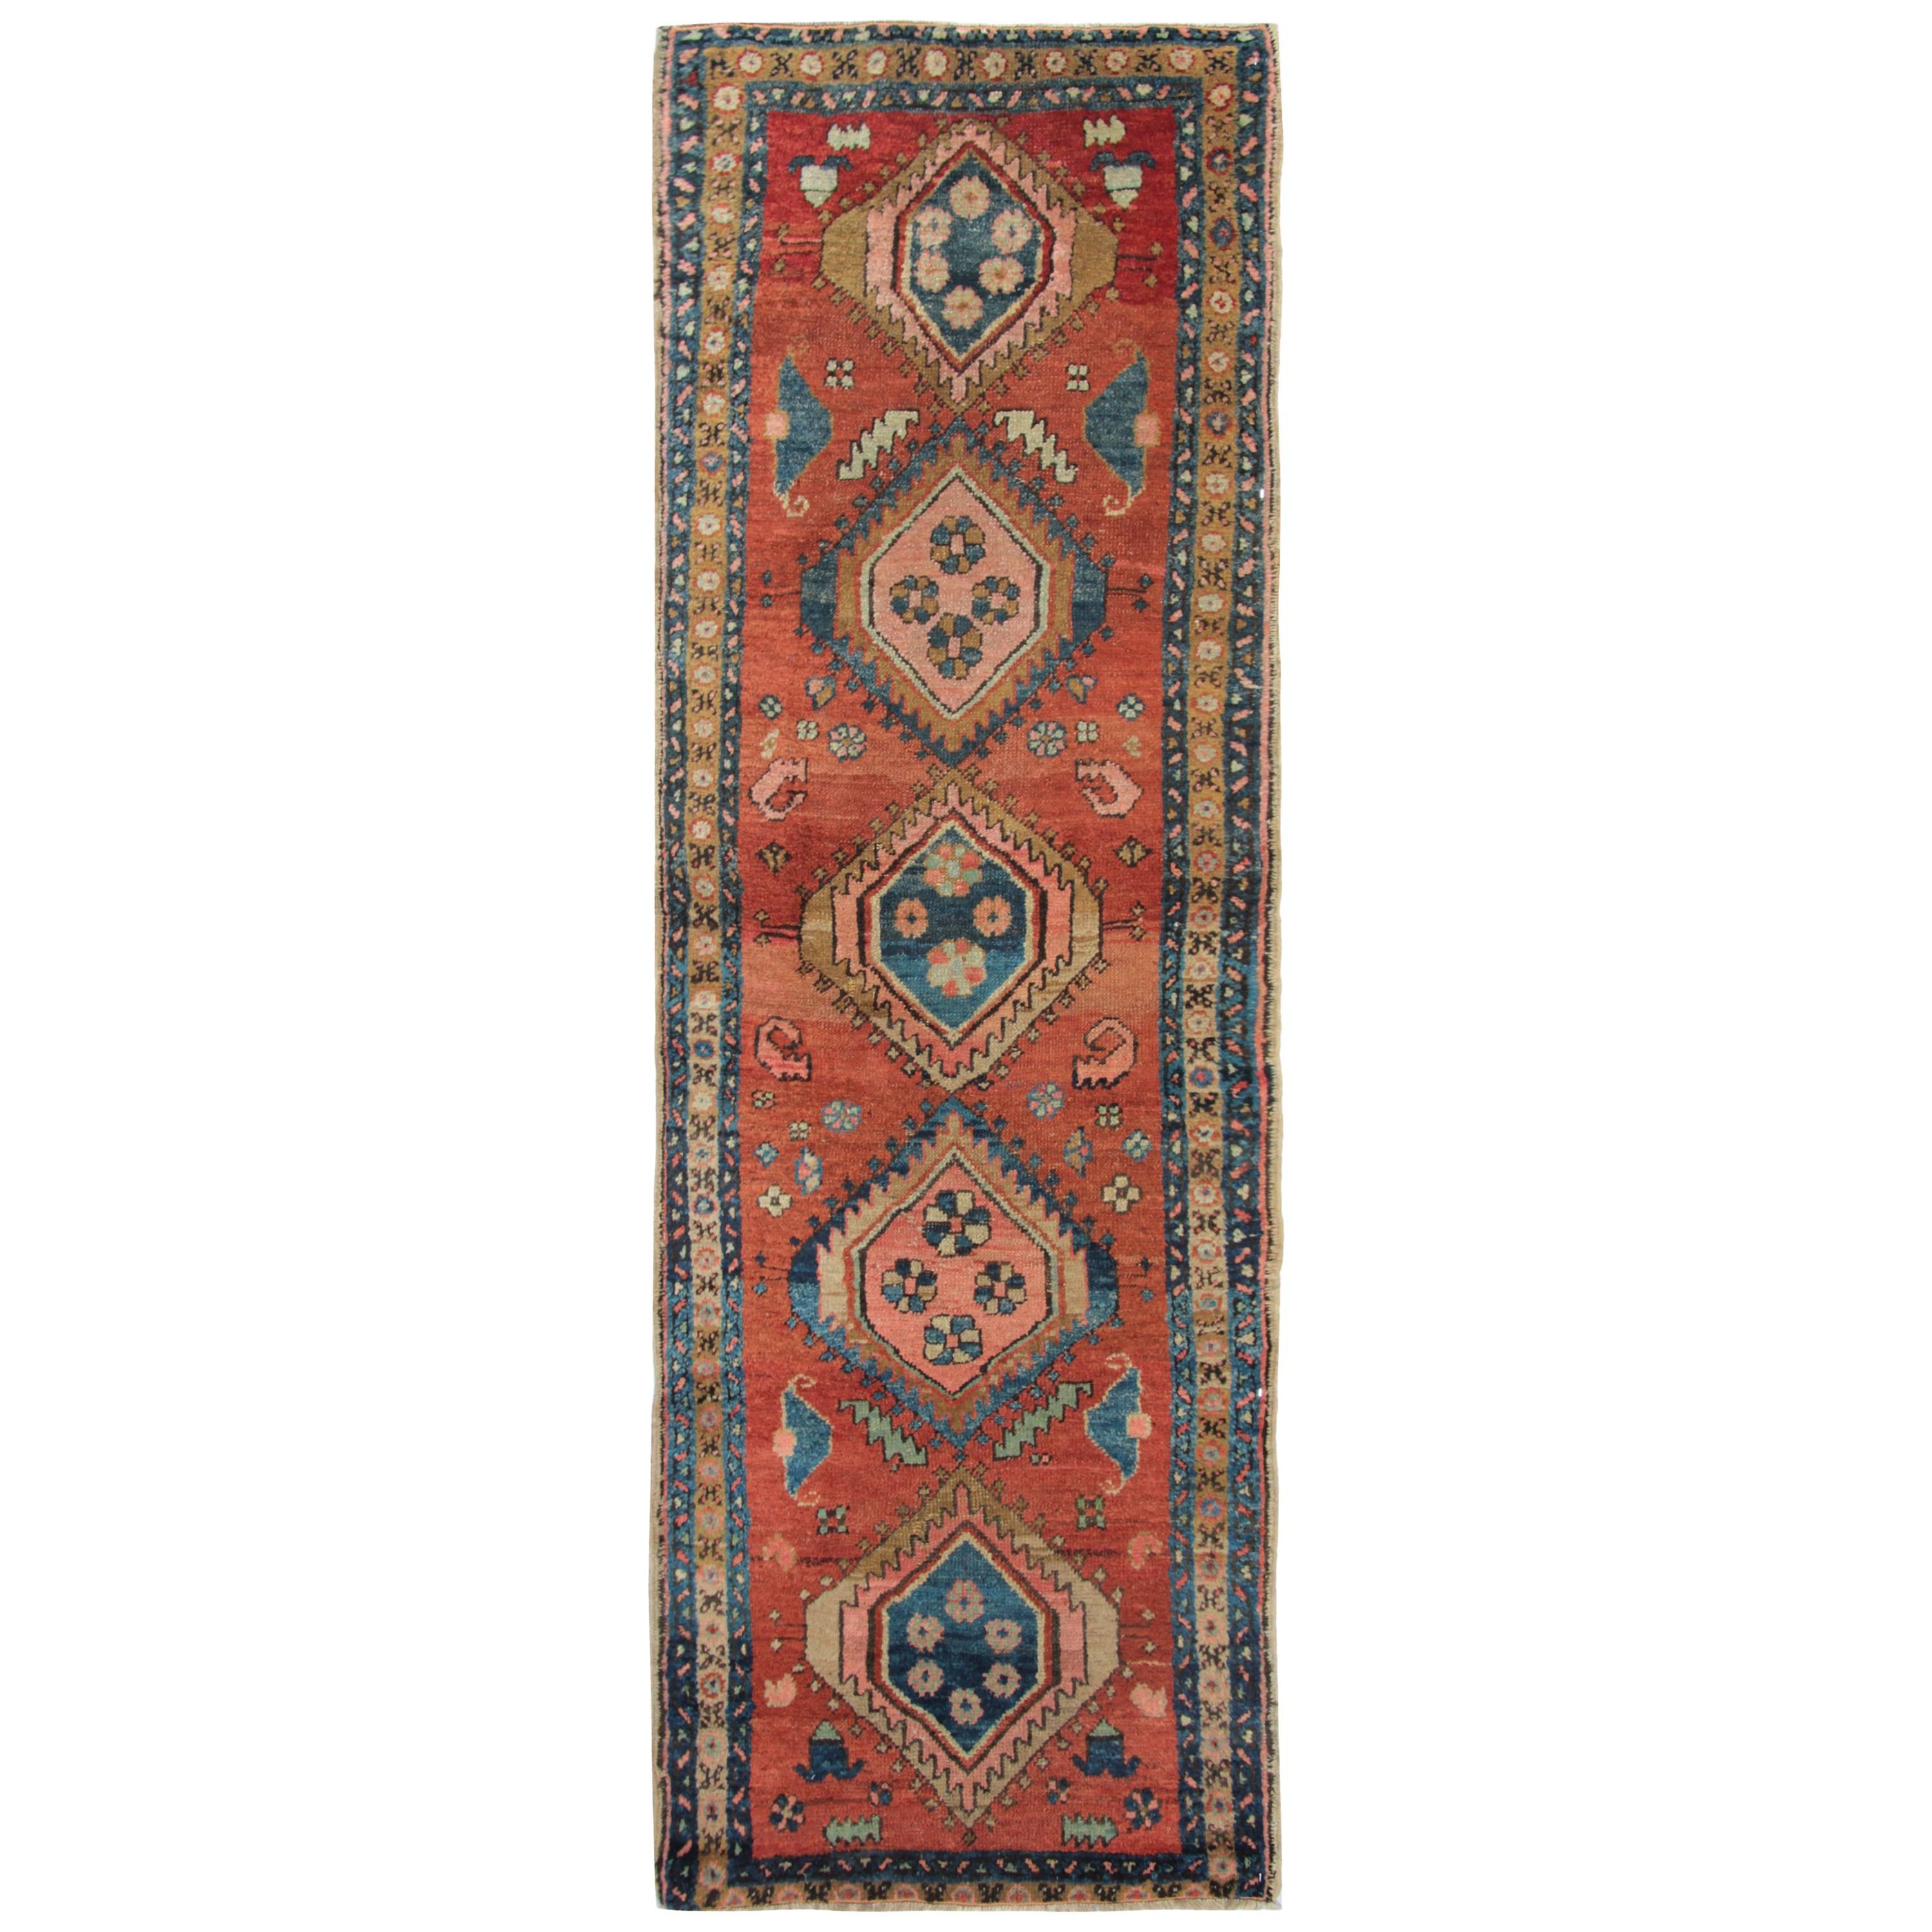 Antique Carpet Runners, Persian Rugs and Runners from Heriz